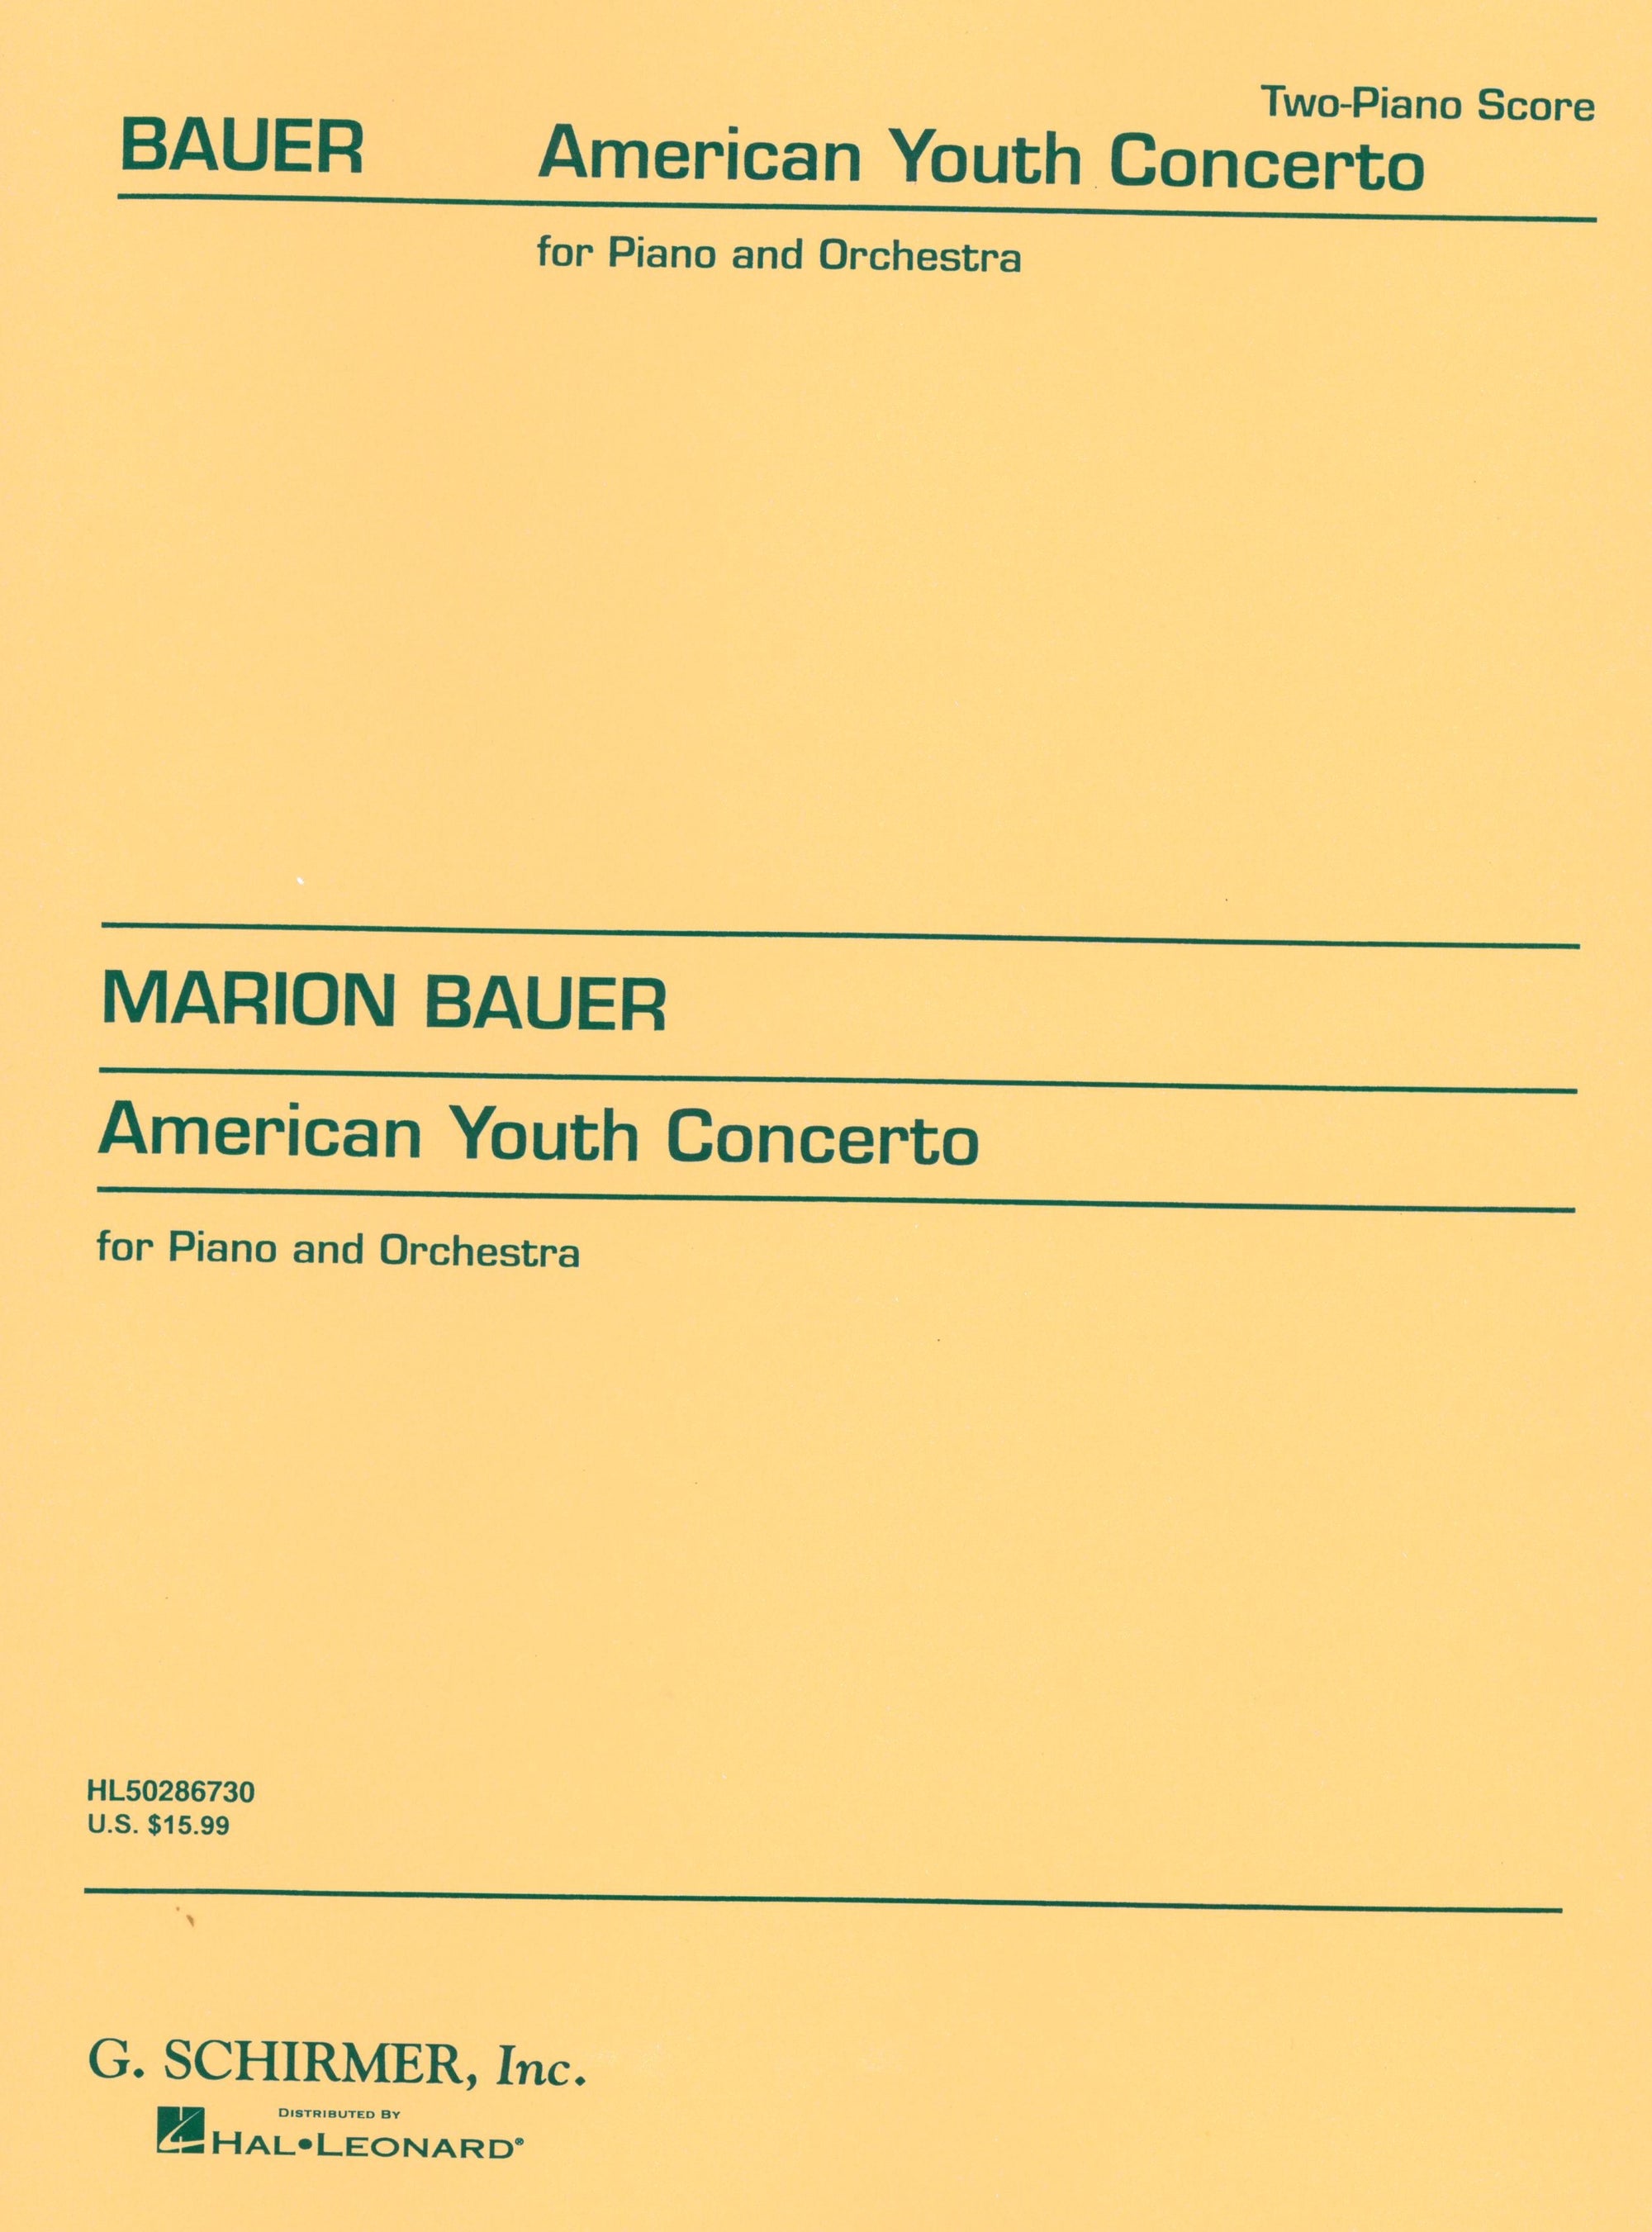 Bauer: American Youth Concerto